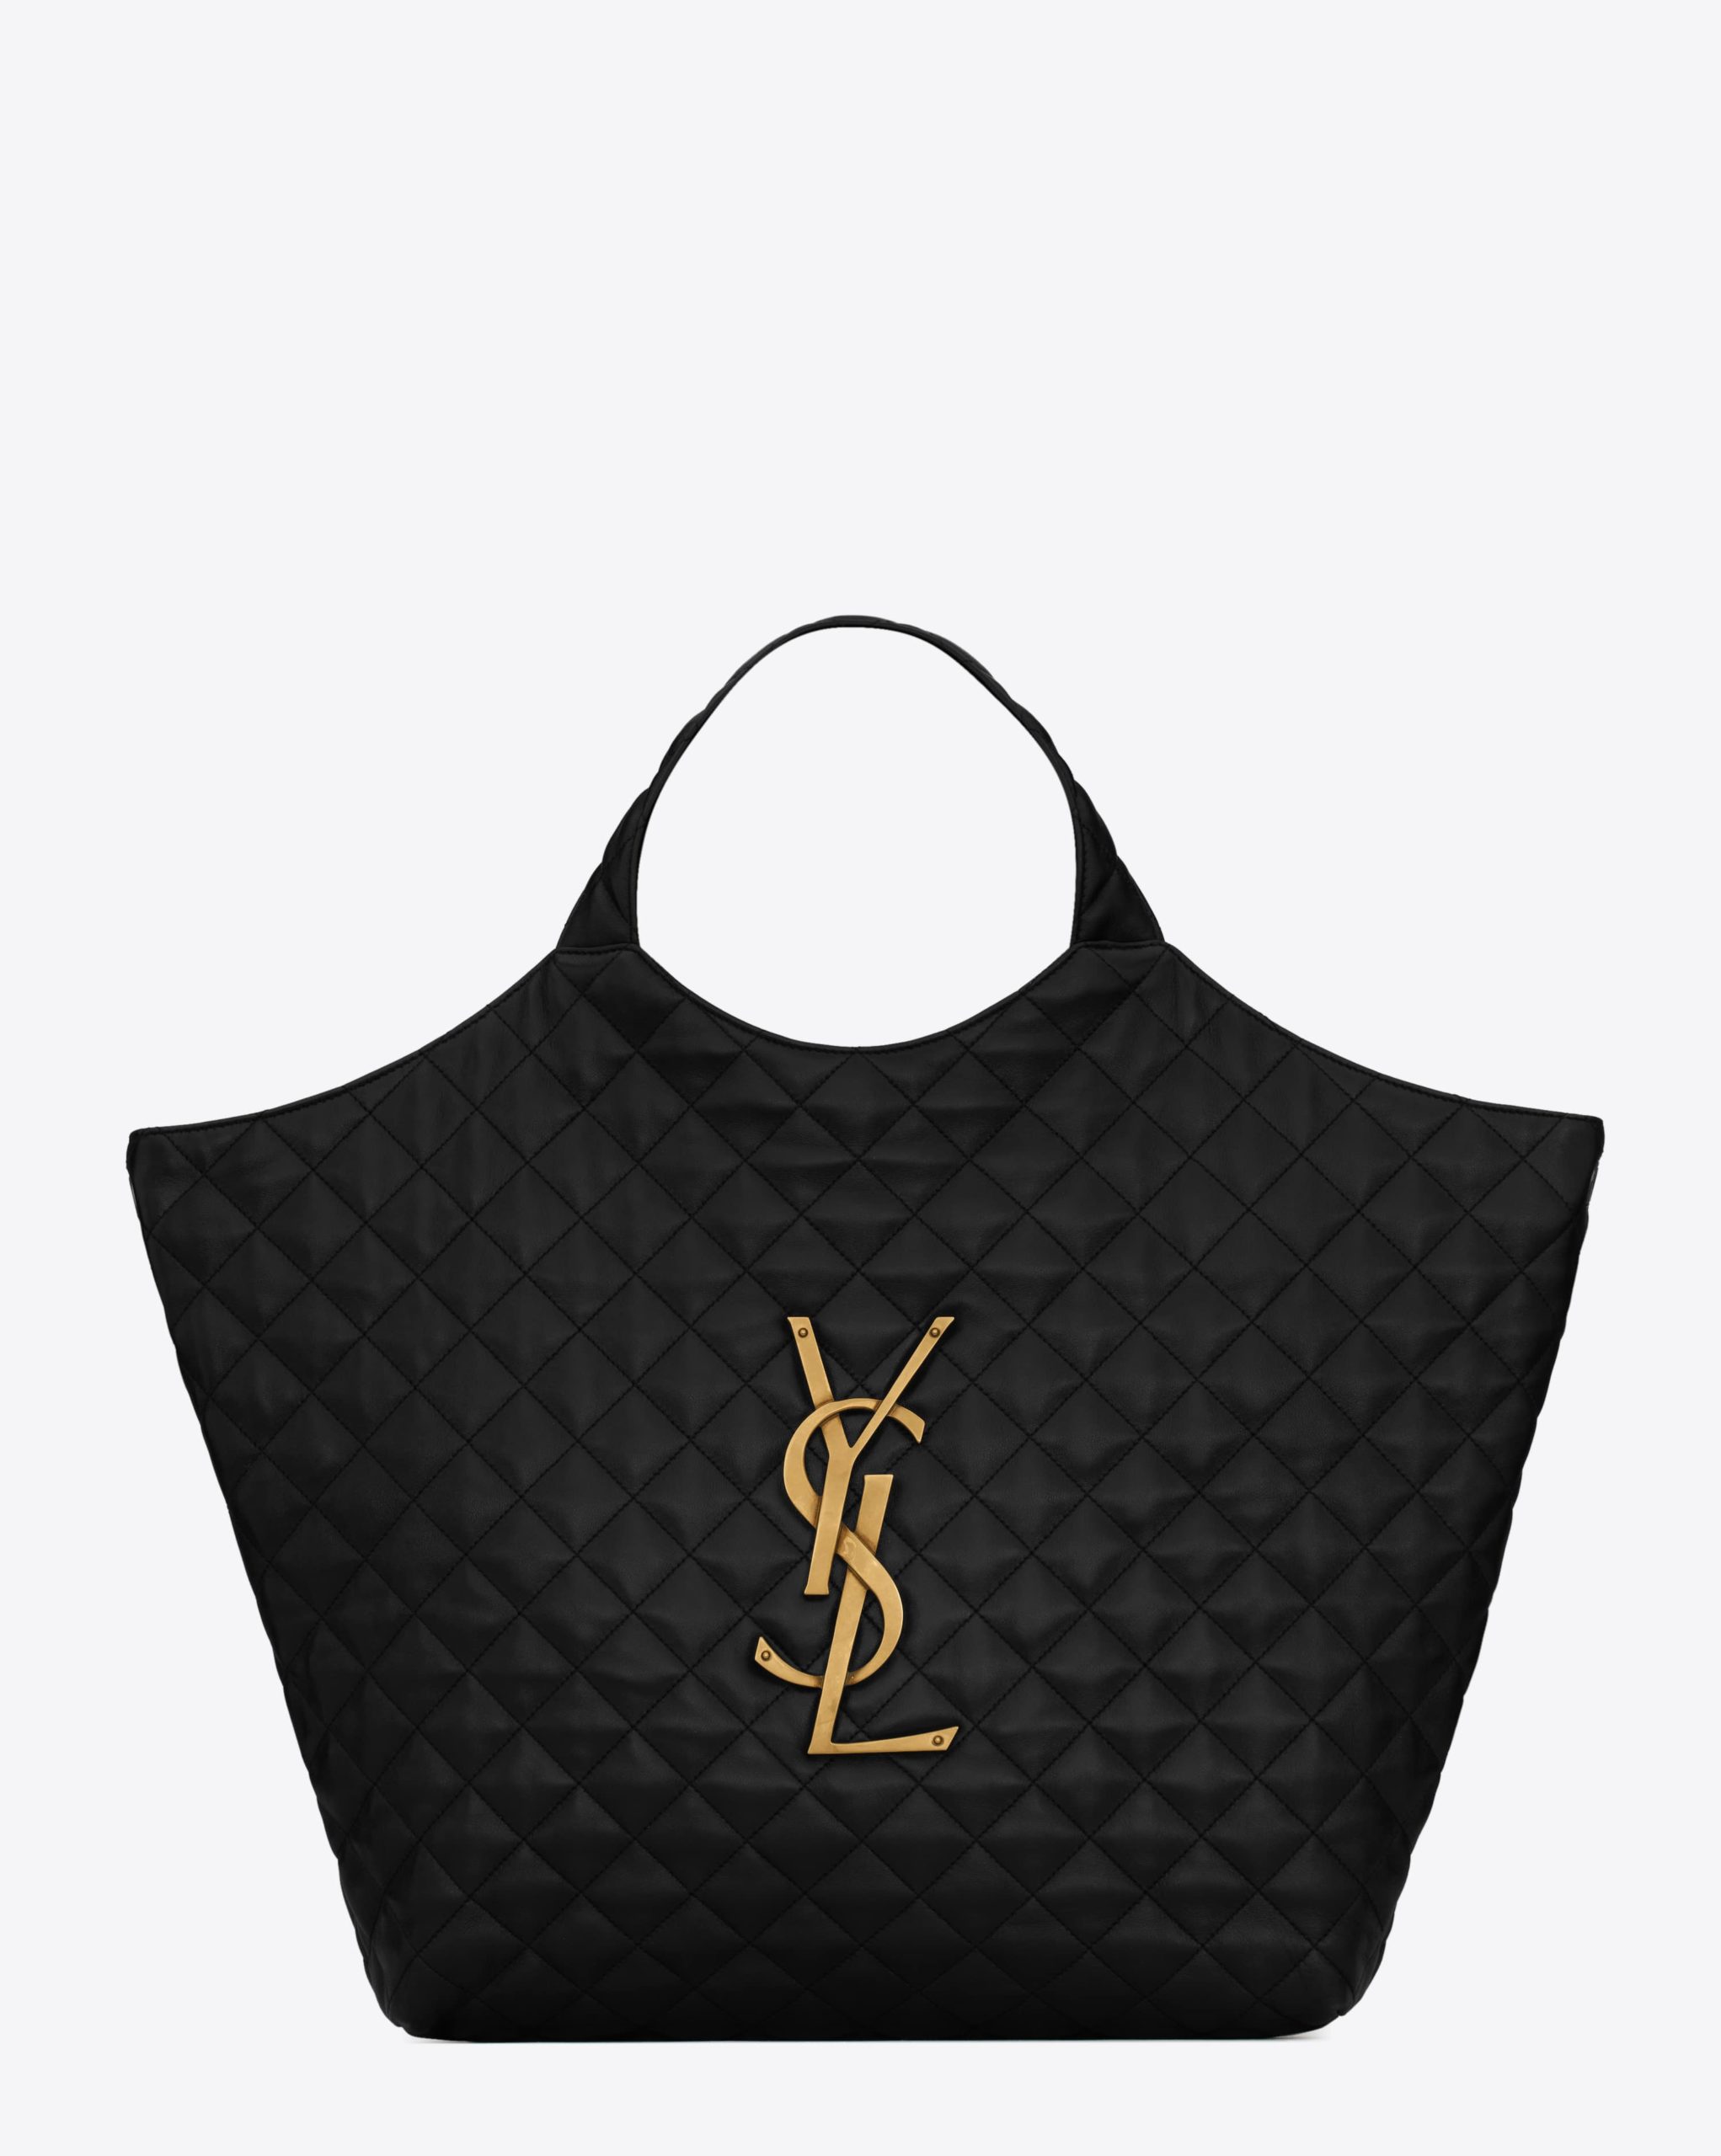 Help me QC this Icare YSL tote from Black Frame factory please! :  r/RepladiesDesigner